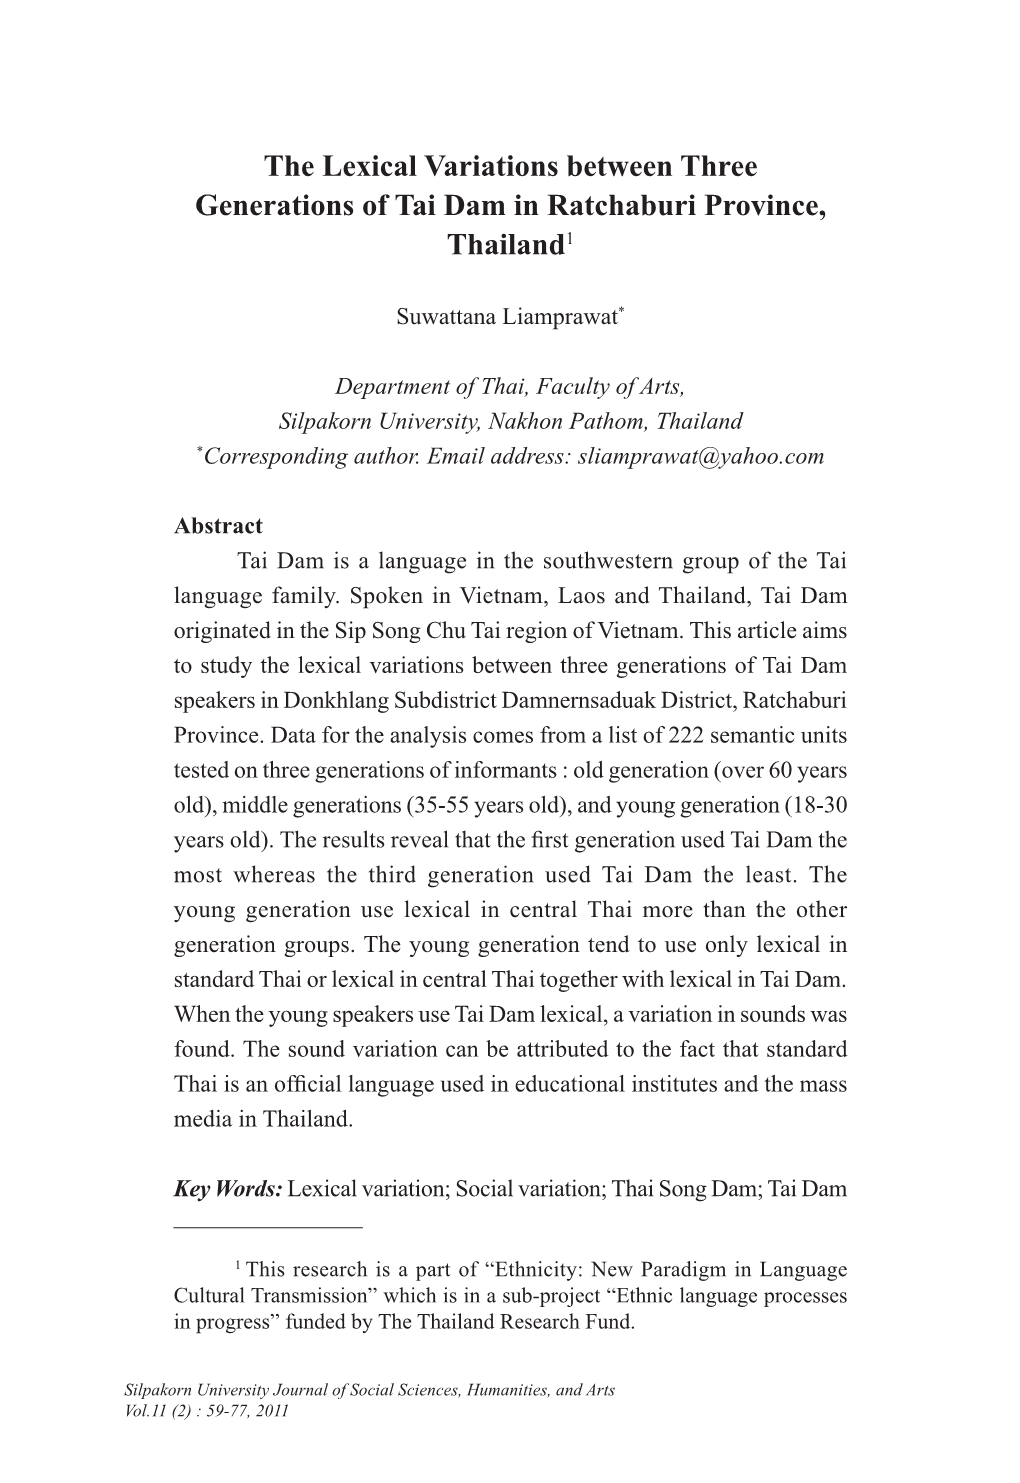 The Lexical Variations Between Three Generations of Tai Dam in Ratchaburi Province, Thailand1